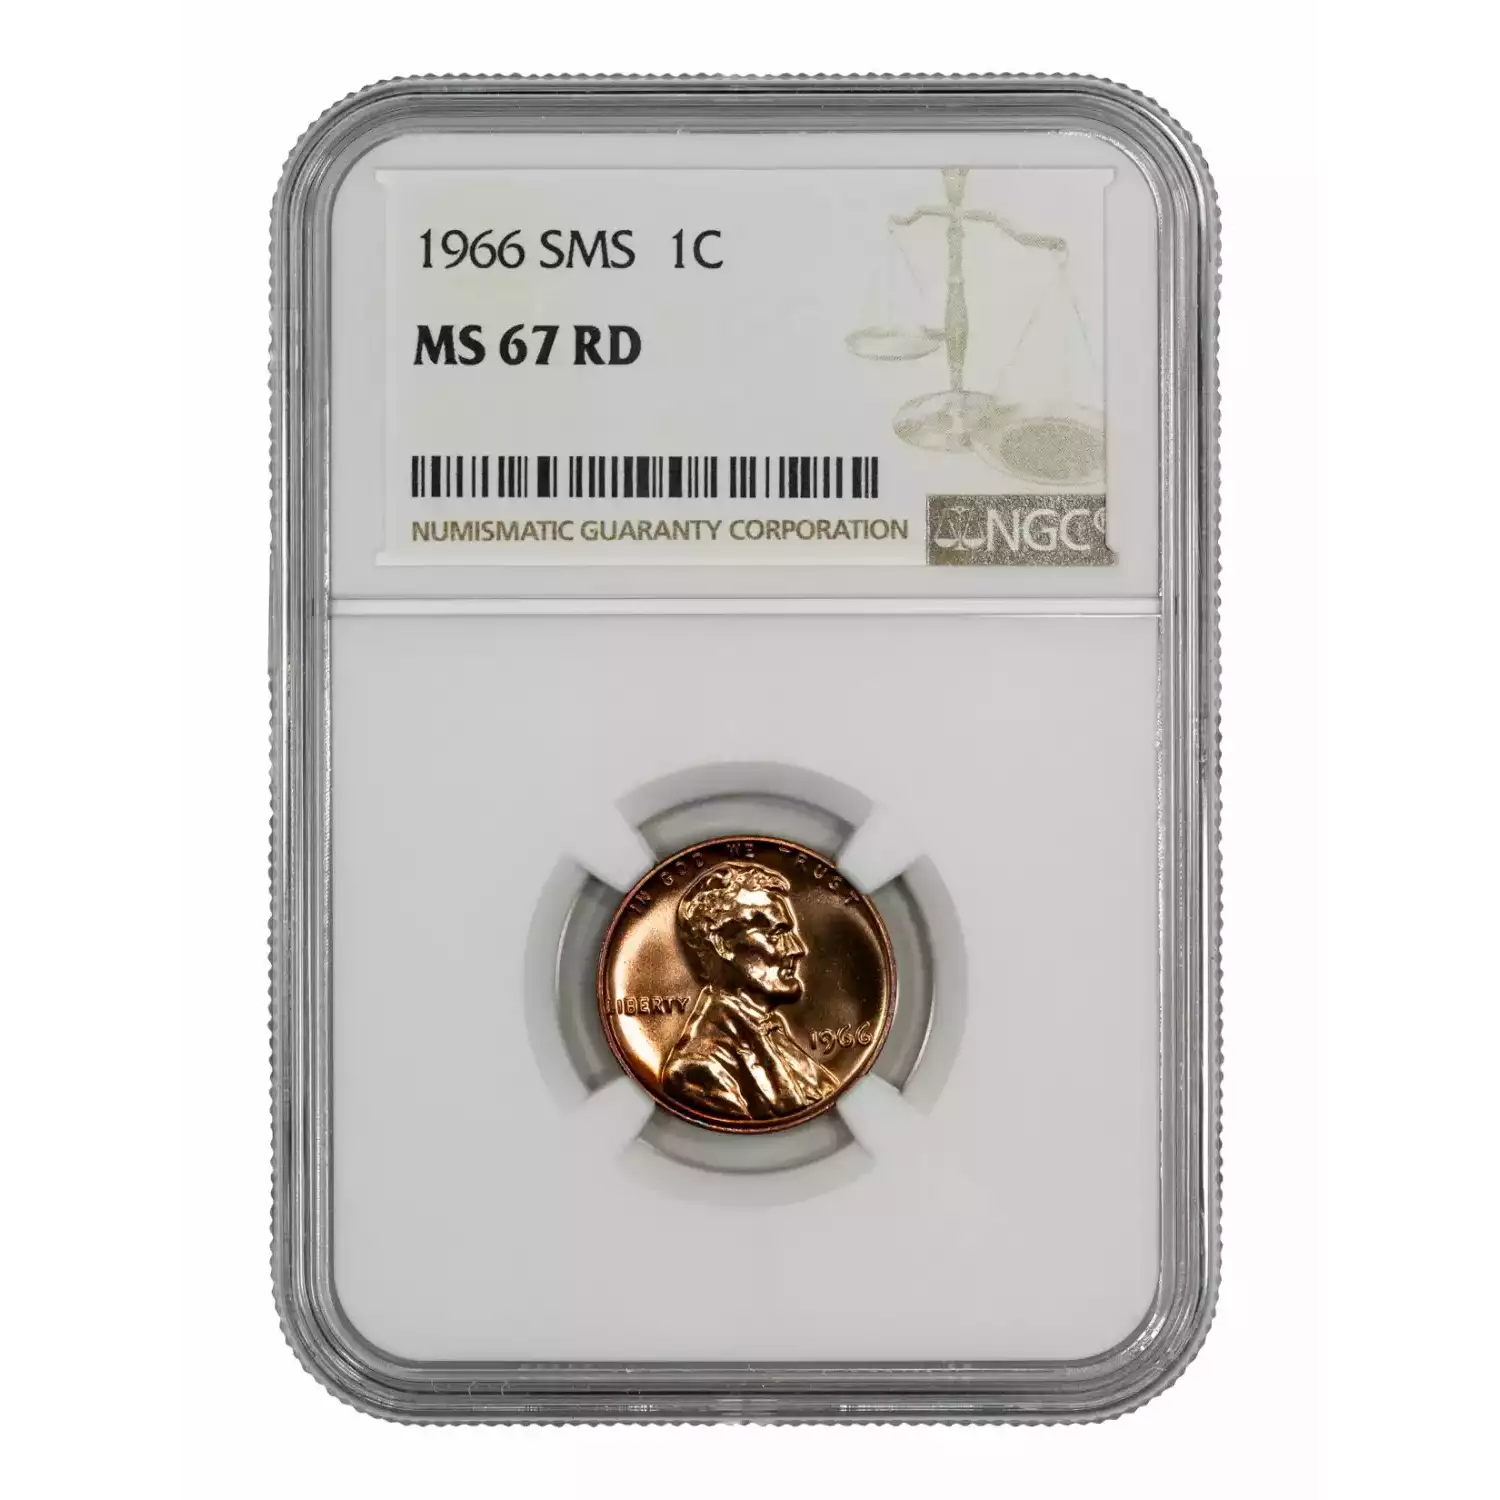 1966 SMS LINCOLN MEMORIAL CENT PENNY 1C NGC CERTIFIED MS 67 RD